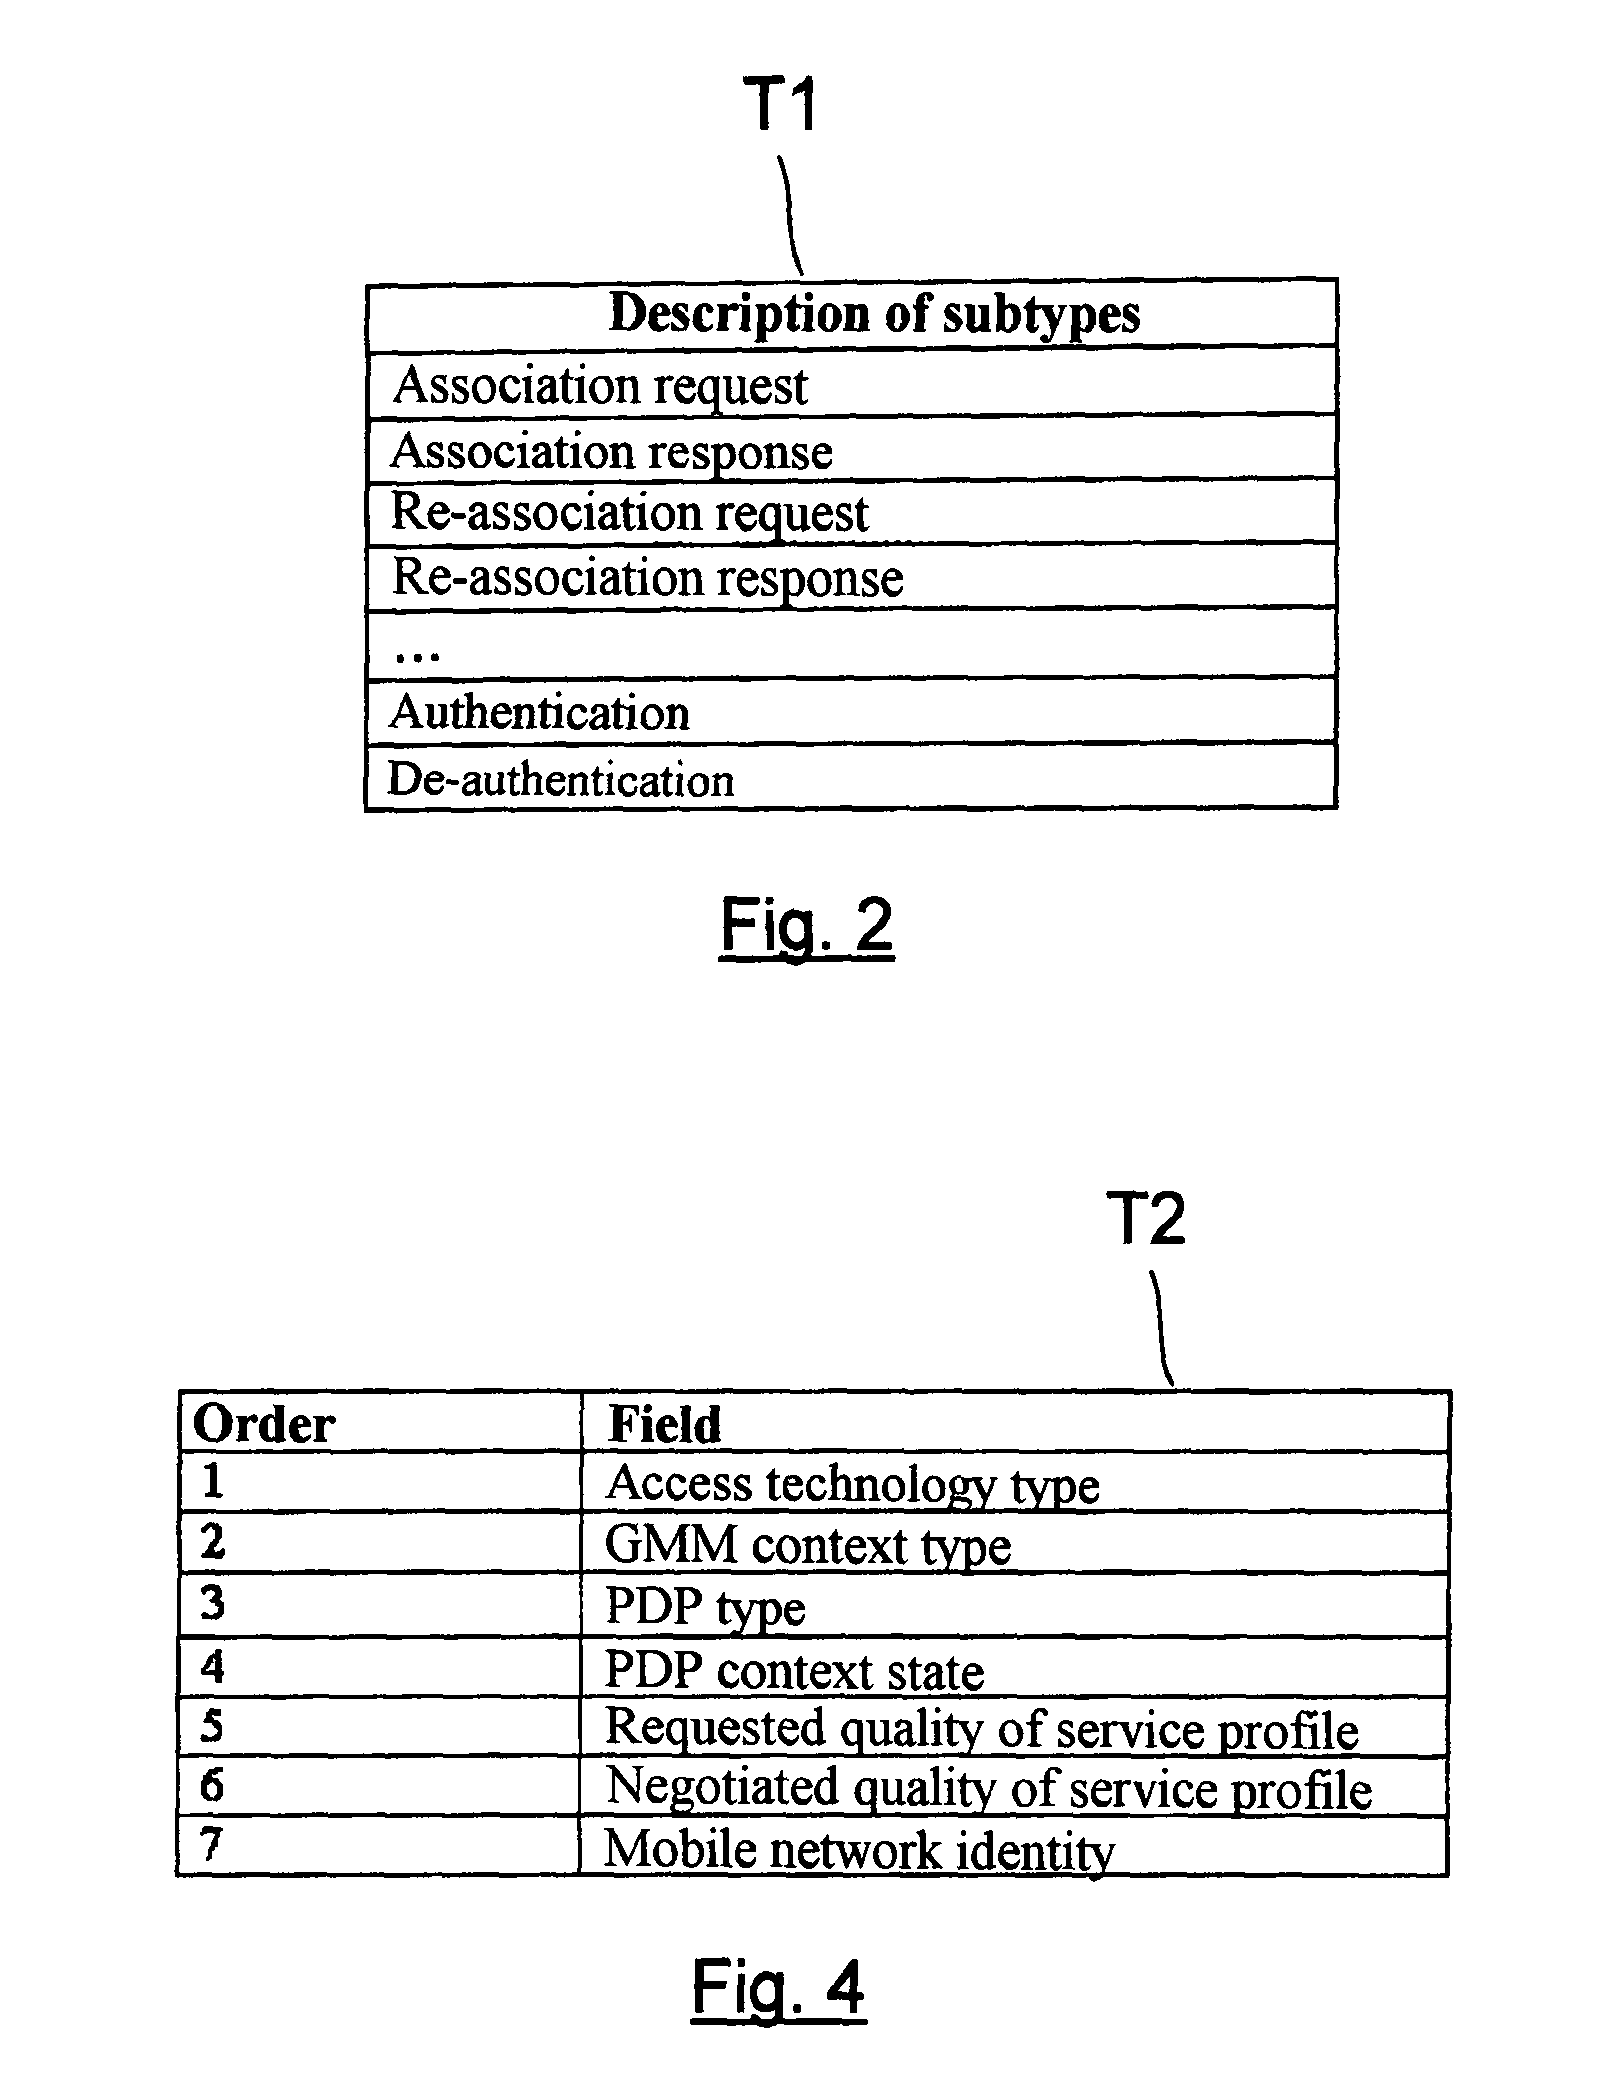 Association of a multi-access terminal to a communication network